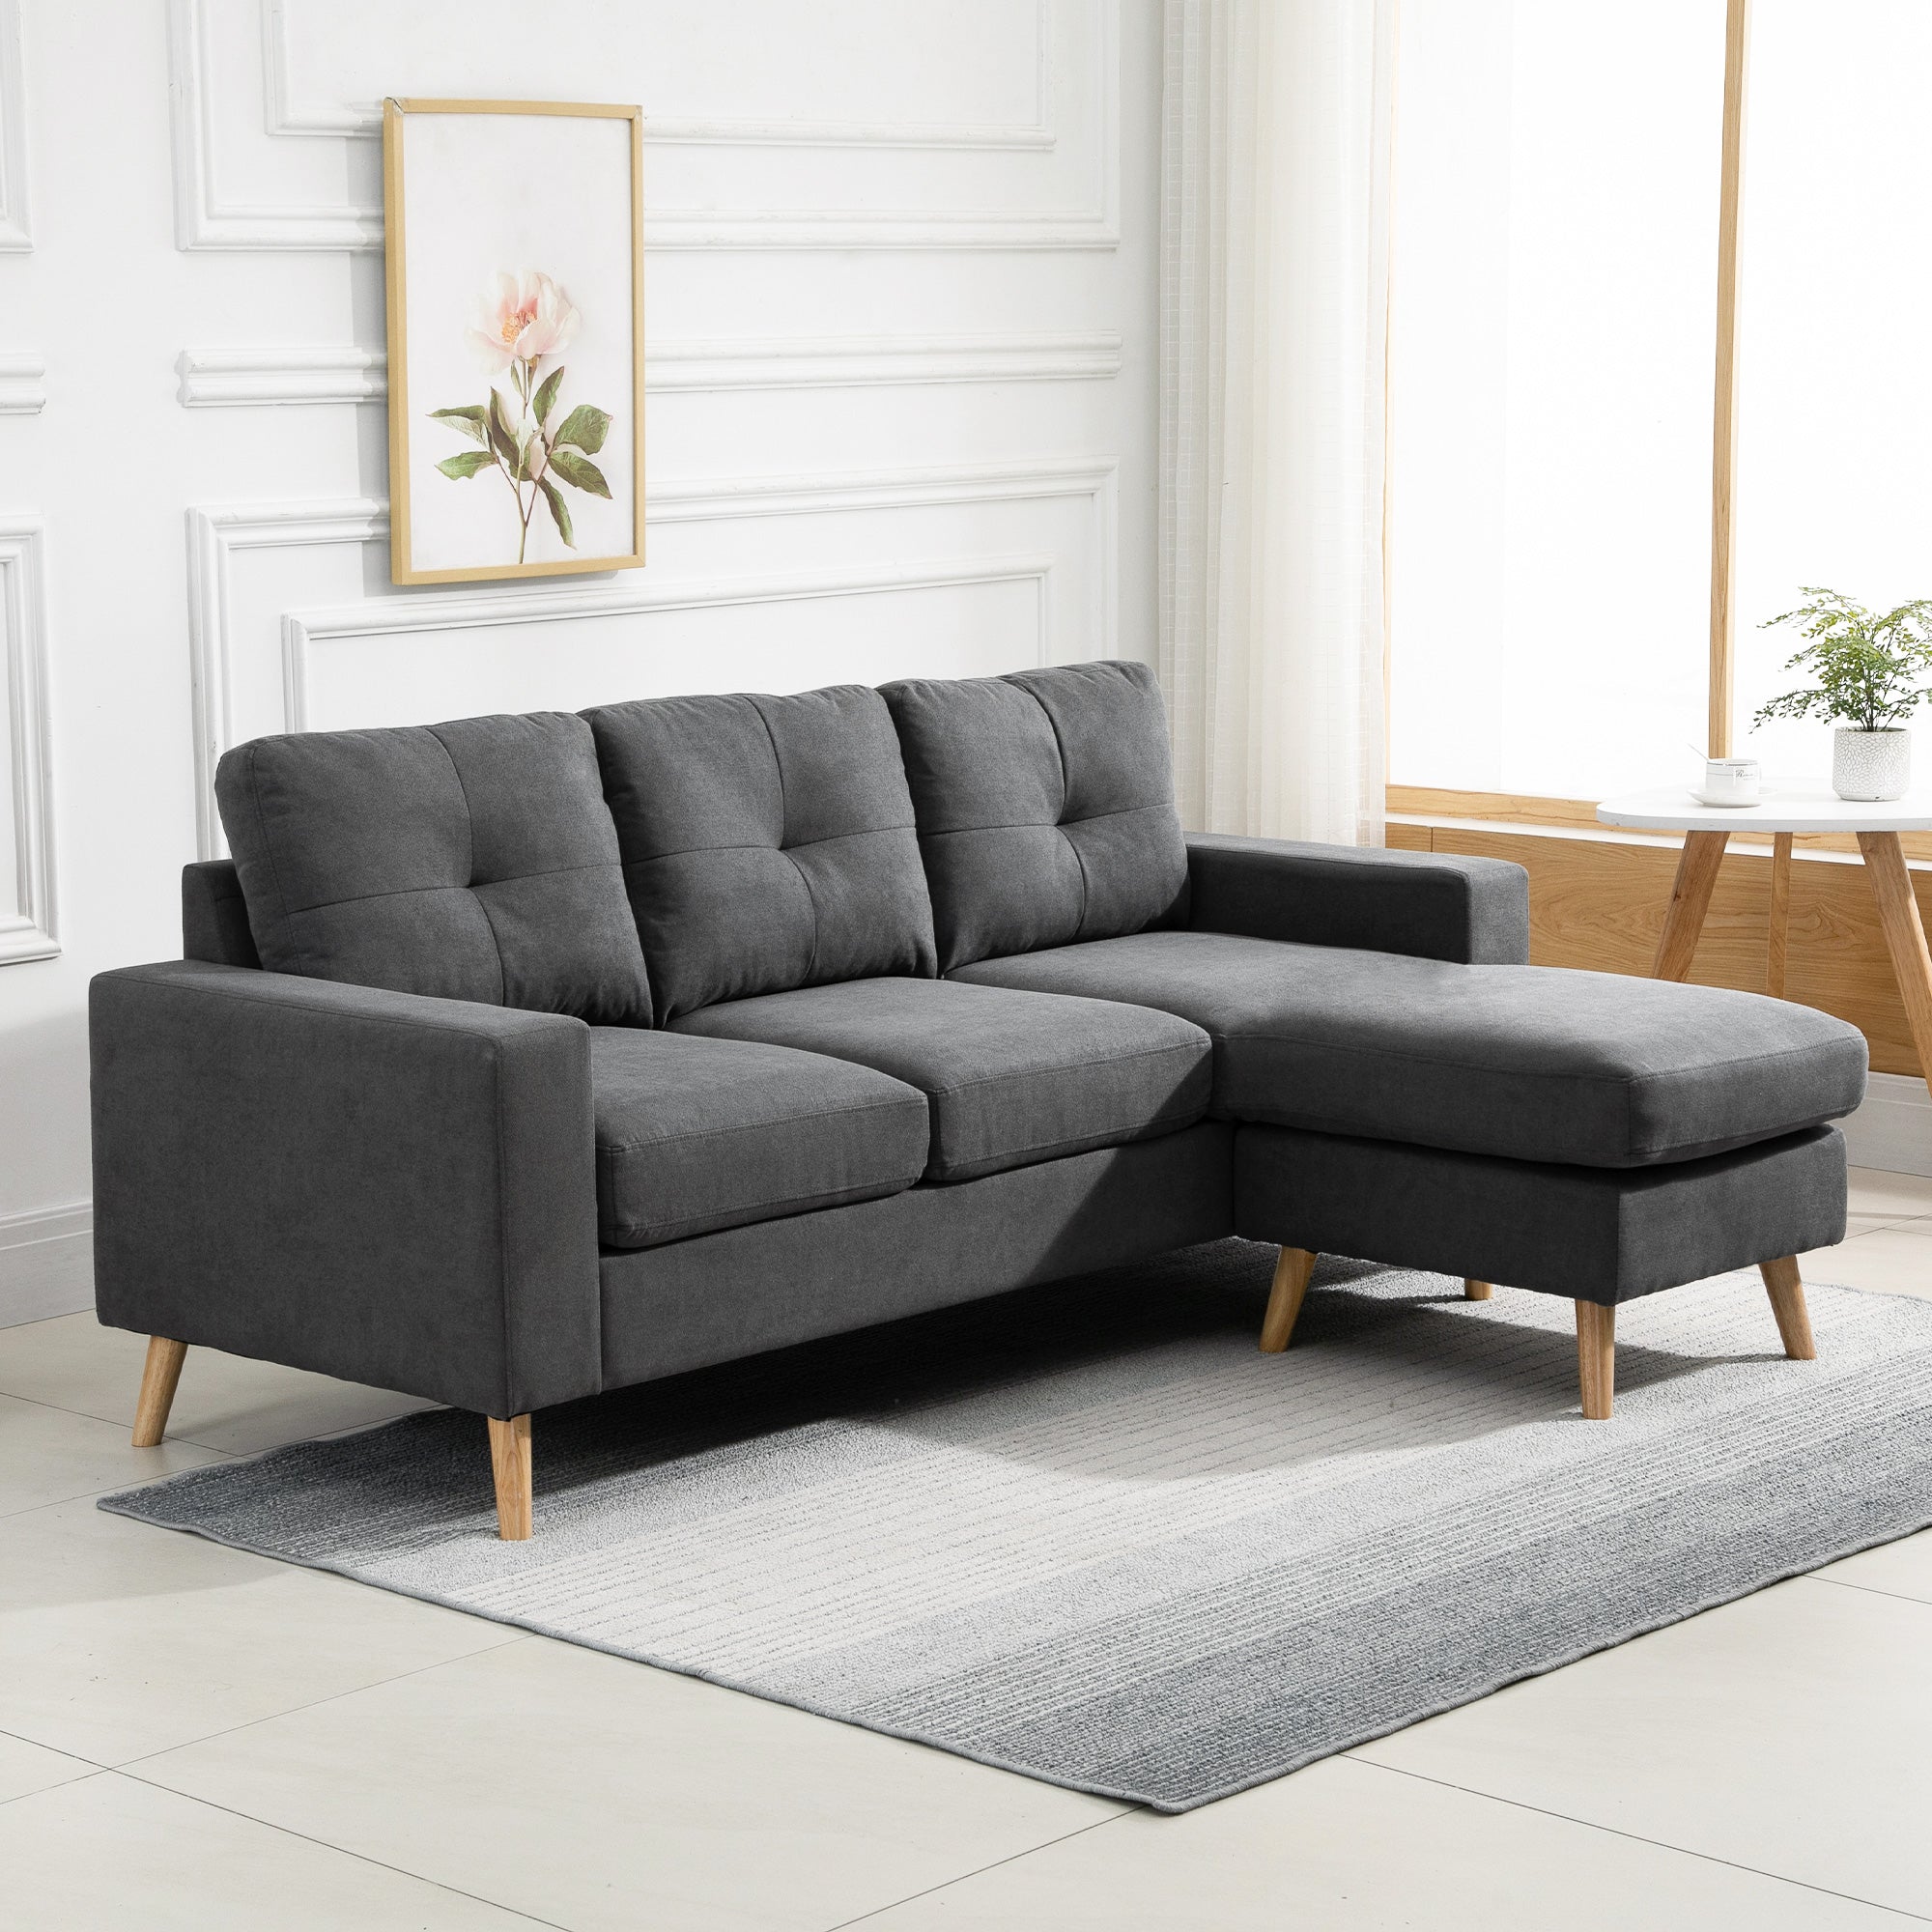 Sectional Sofa Couch, L Shaped Couch with Reversible Chaise, Wooden Legs for Living Room, Bedroom, Dark Grey - Gallery Canada